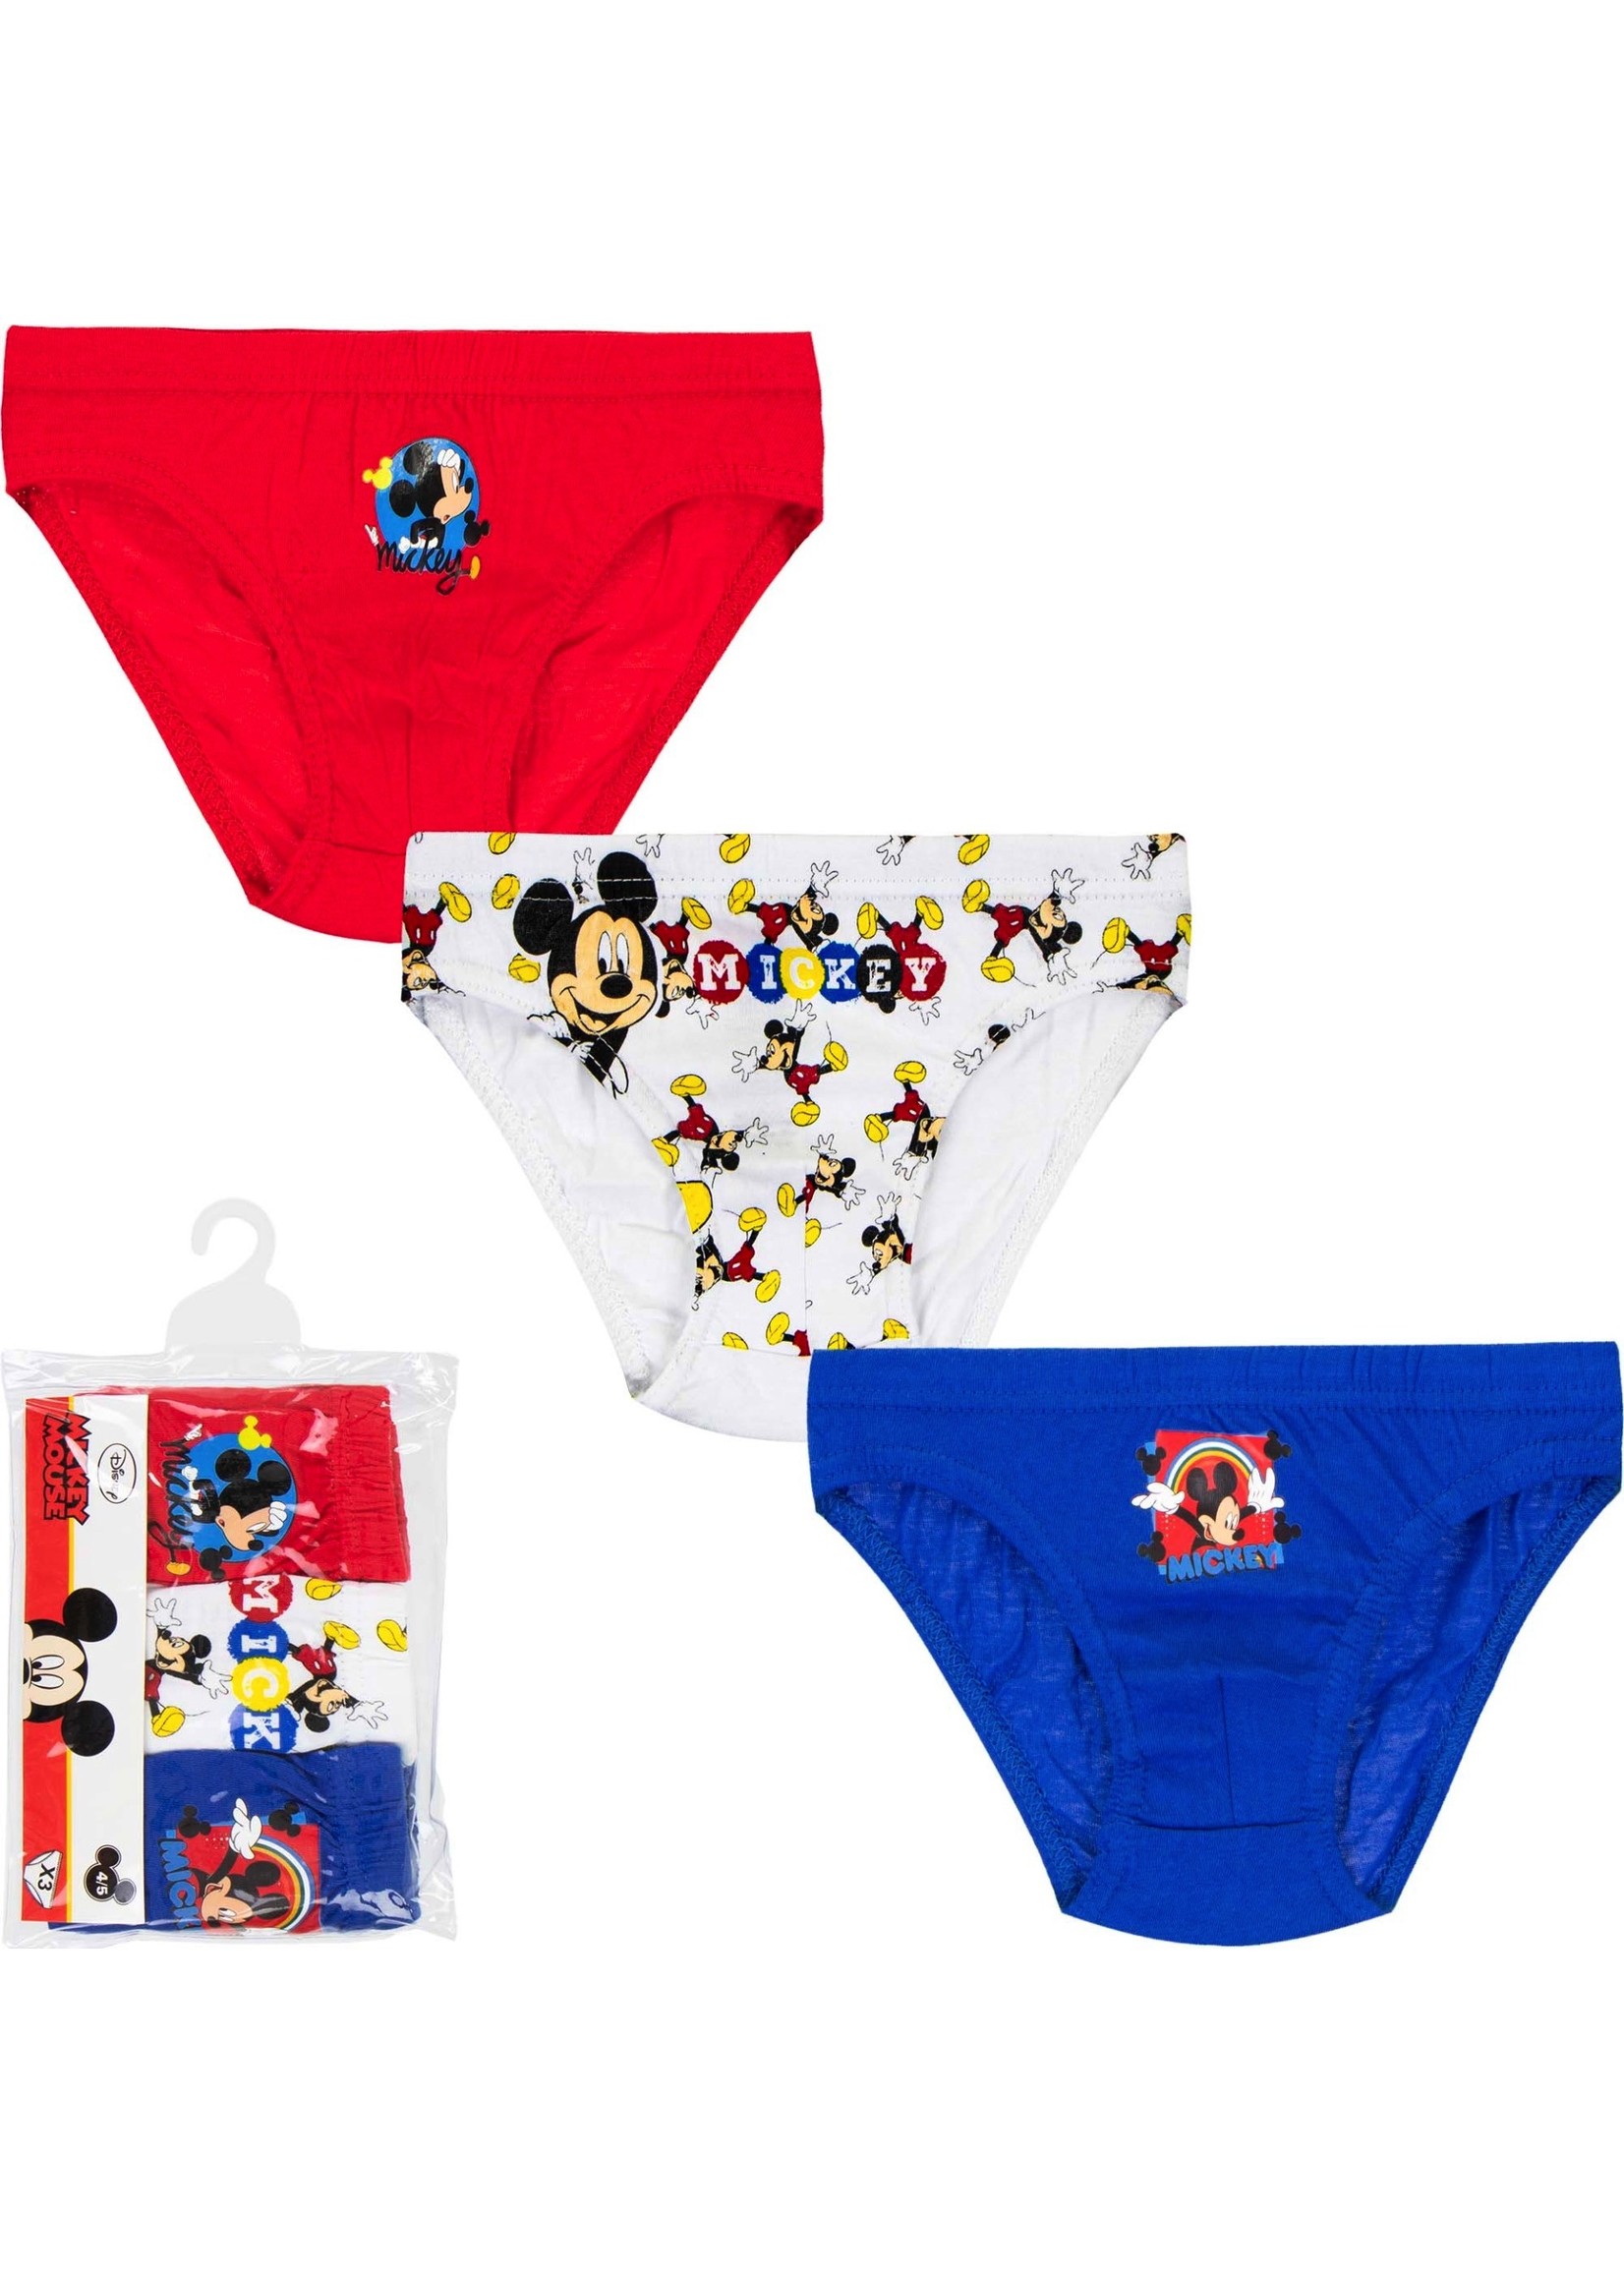 Disney Mickey Mouse briefs from Disney 3 pack